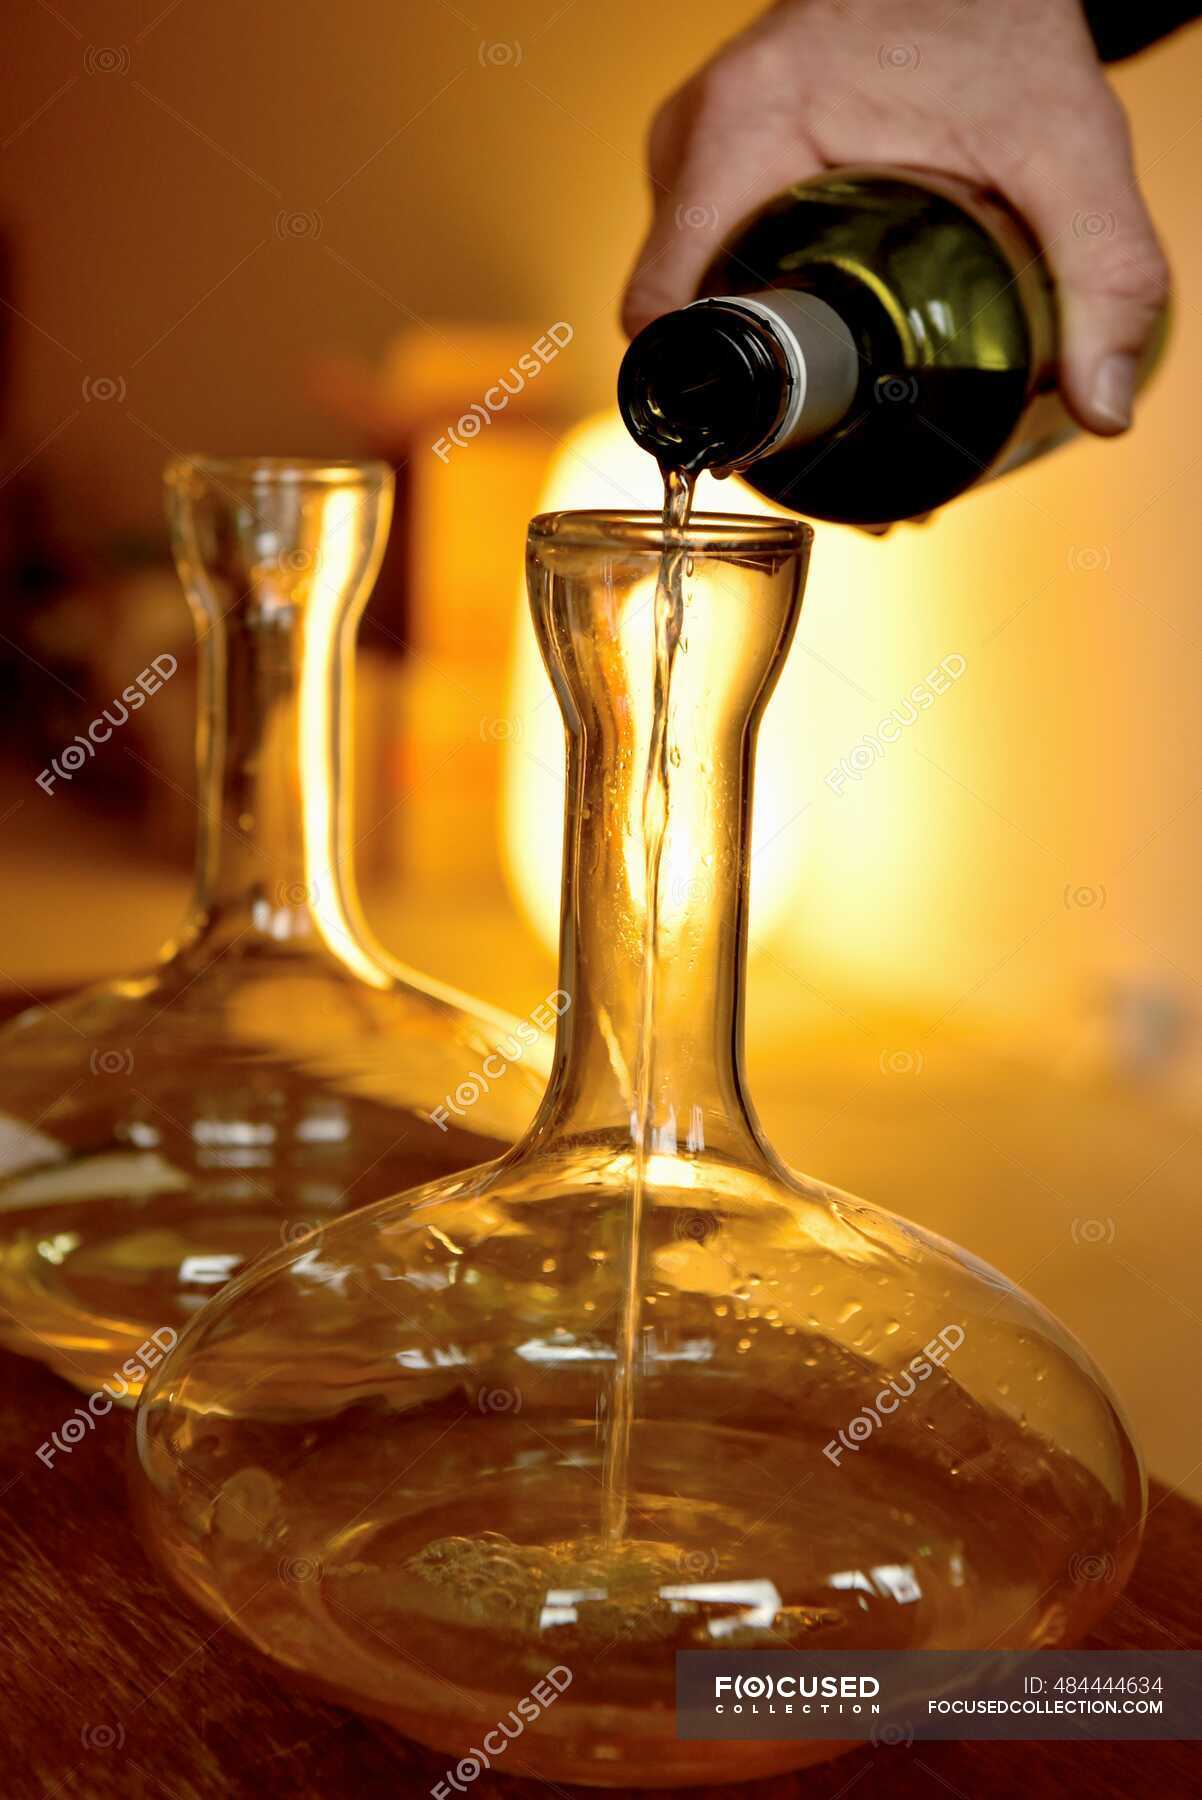 twintig Gaan Editor Decanting a white wine in a karaf — being decanted, human - Stock Photo |  #484444634